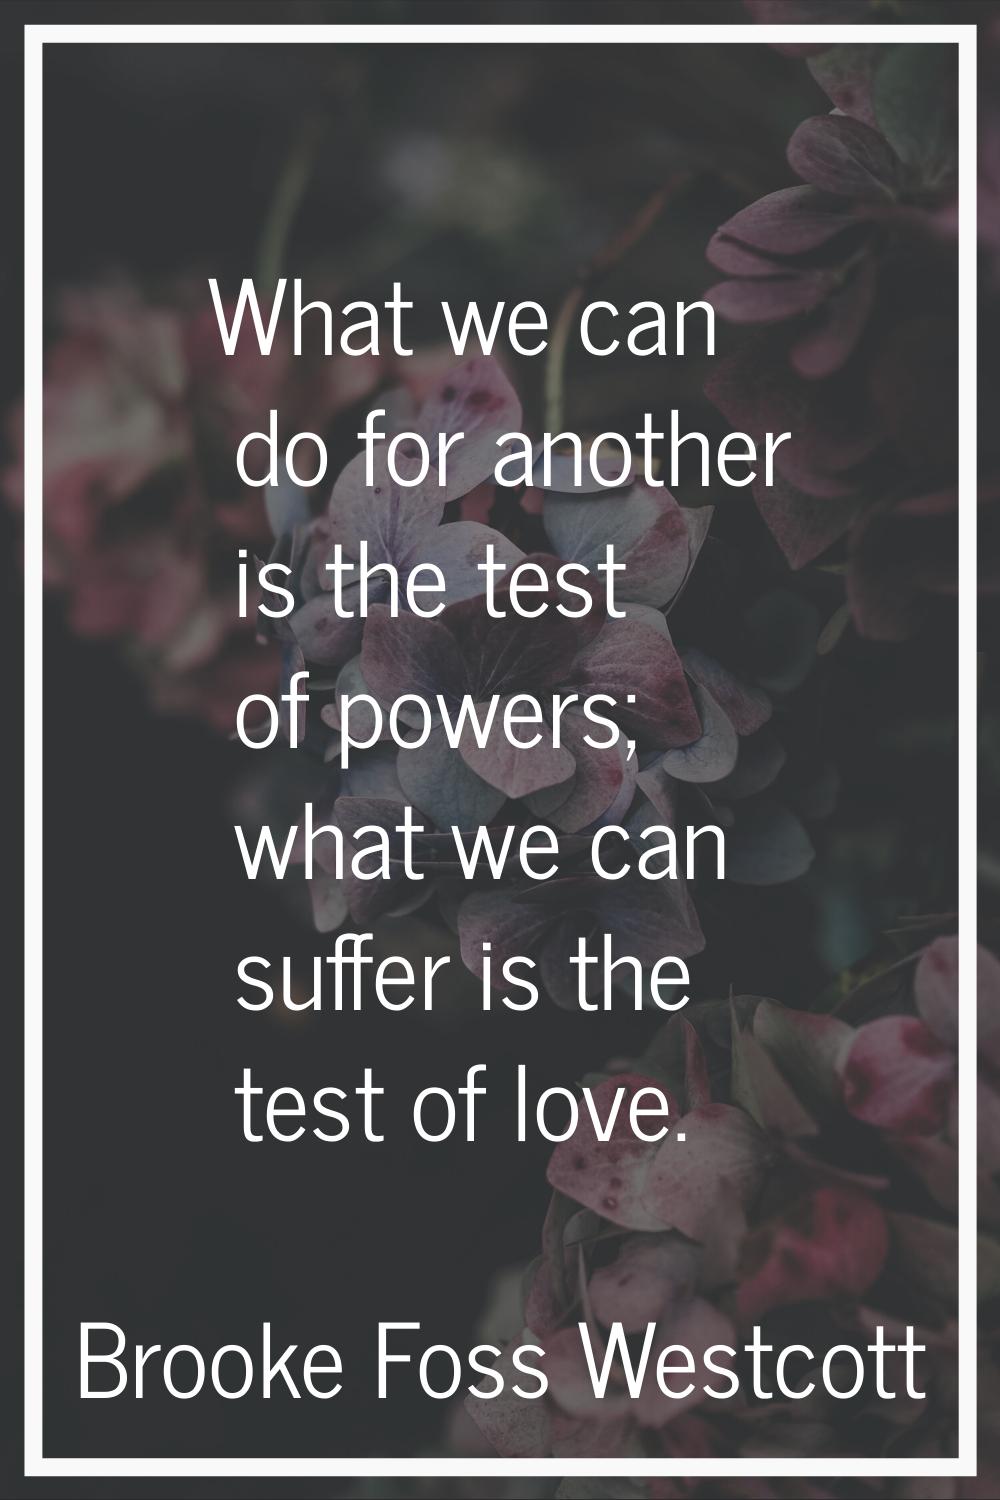 What we can do for another is the test of powers; what we can suffer is the test of love.